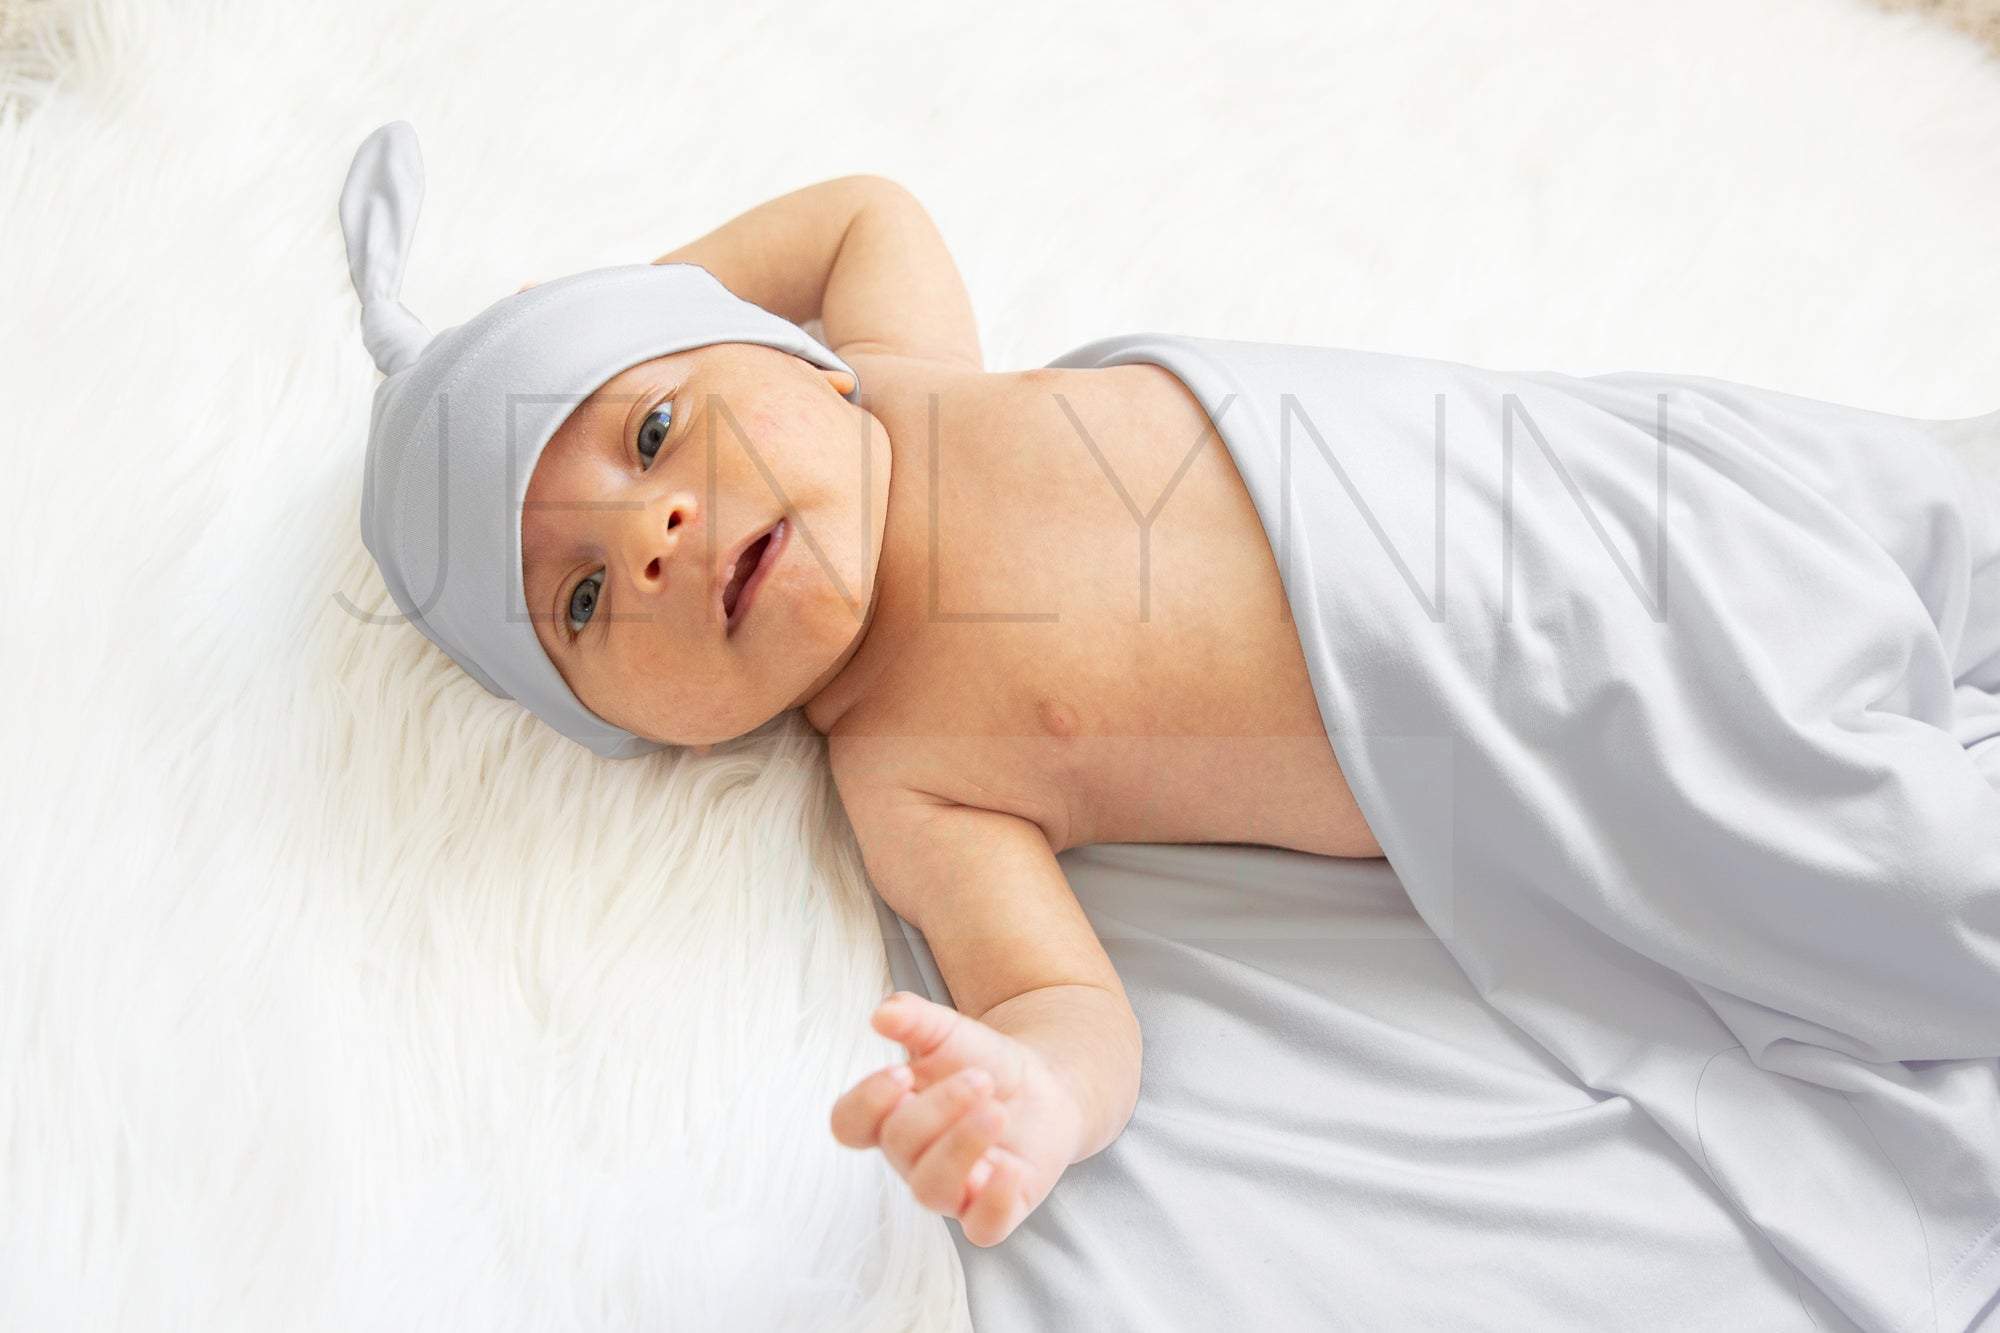 Stretch Jersey Blanket with knotted hat on baby Mockup #BL10 PSD